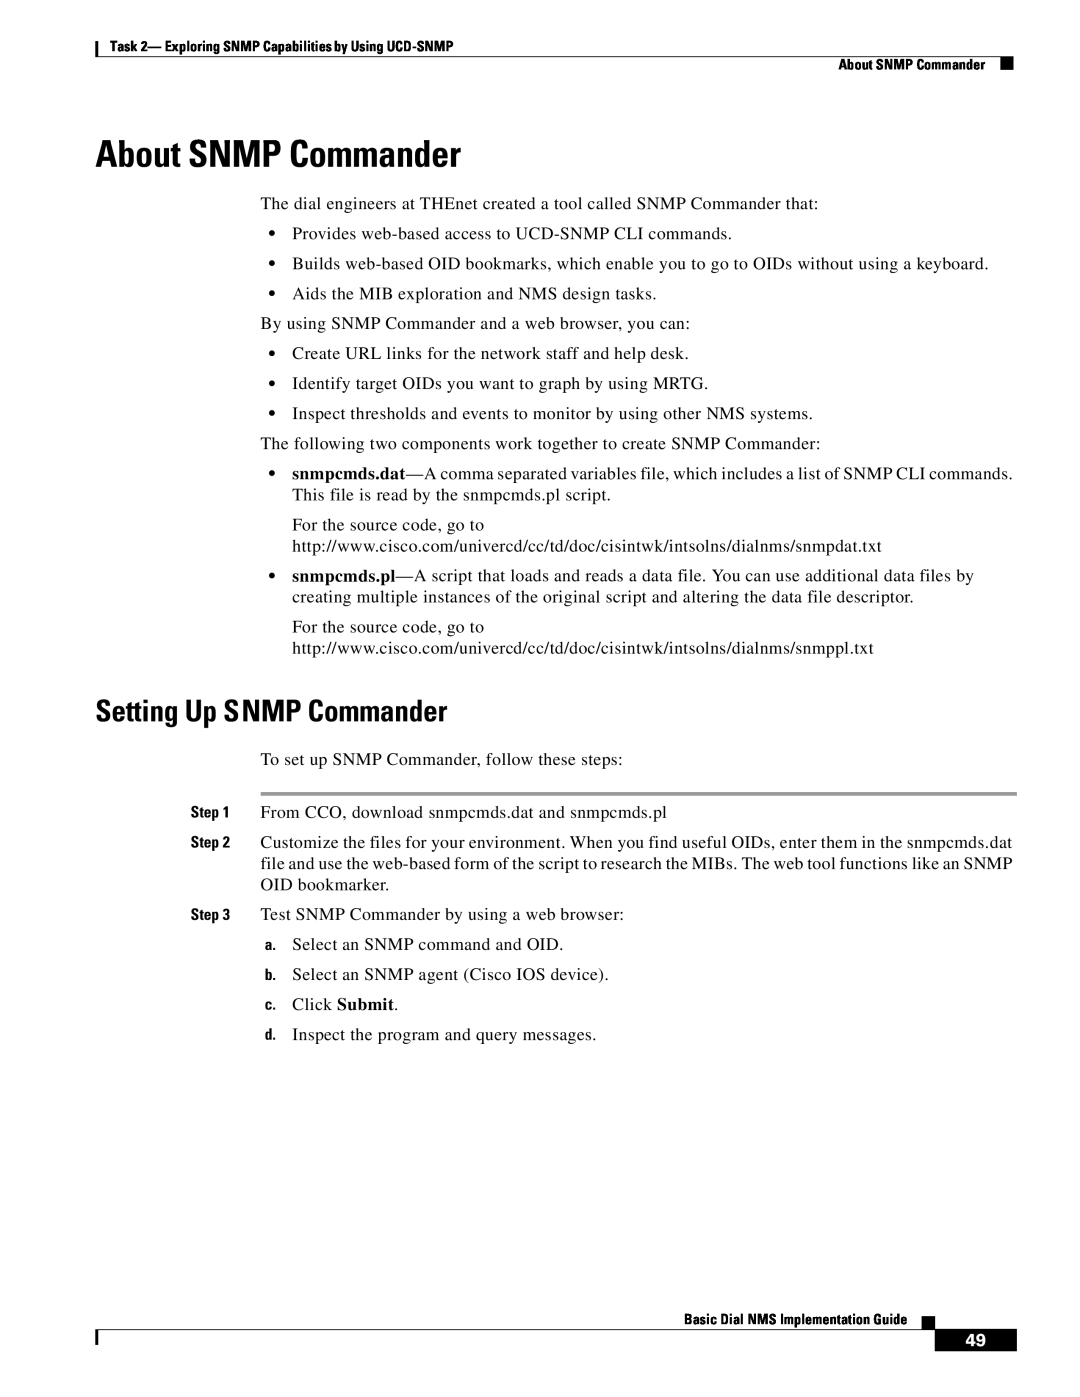 Cisco Systems Dial NMS manual About SNMP Commander, Setting Up SNMP Commander 